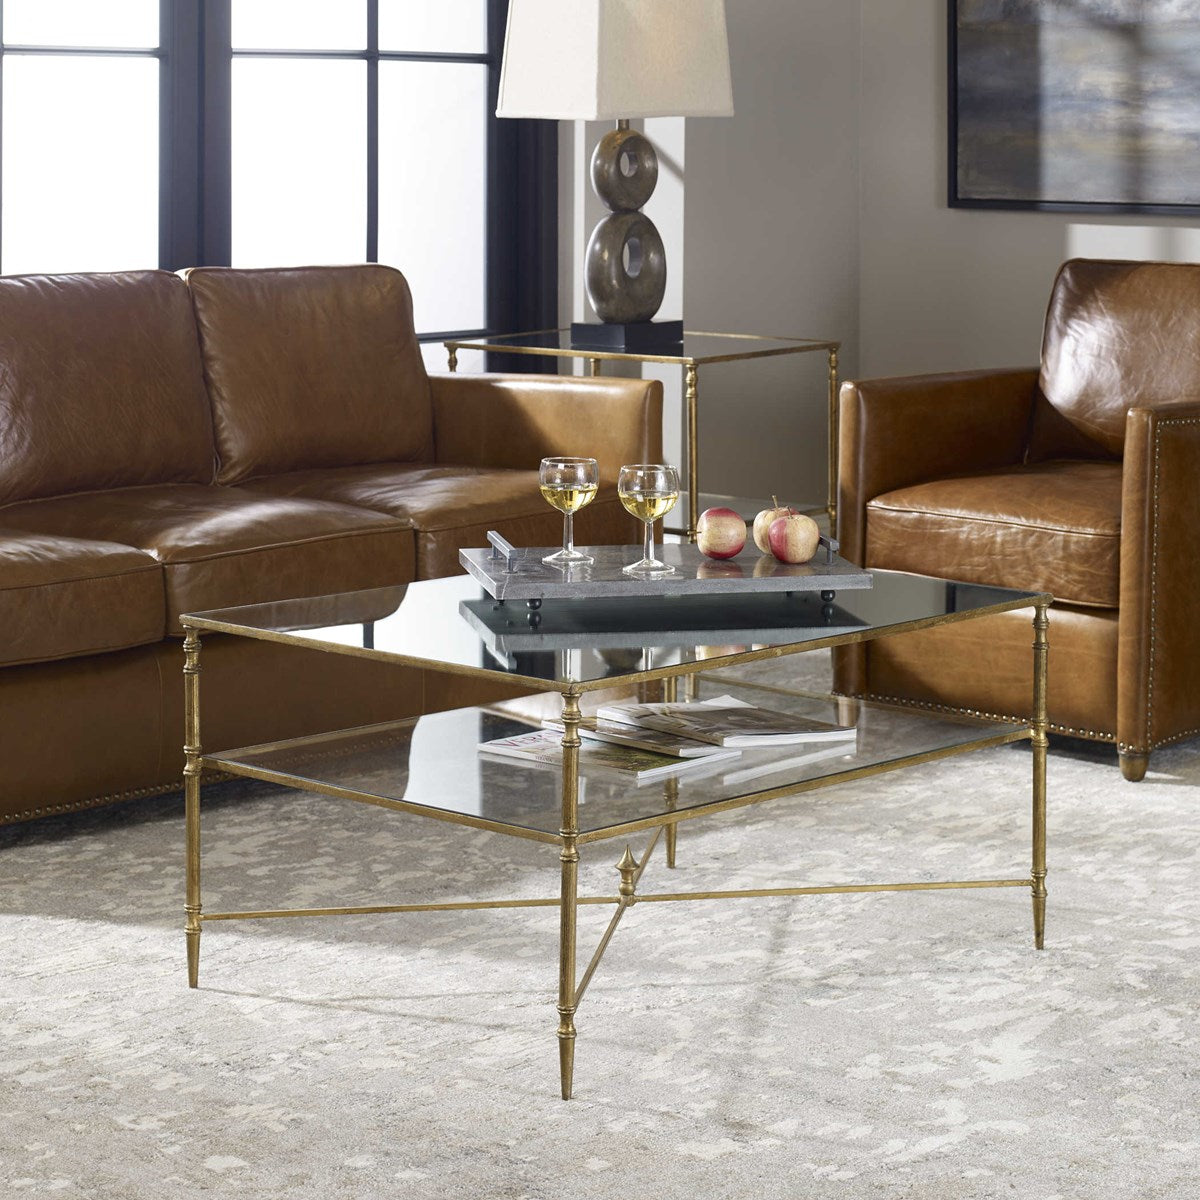 Uttermost Furniture Motor Freight-Rate to be Quoted Uttermost Henzler Coffee Table